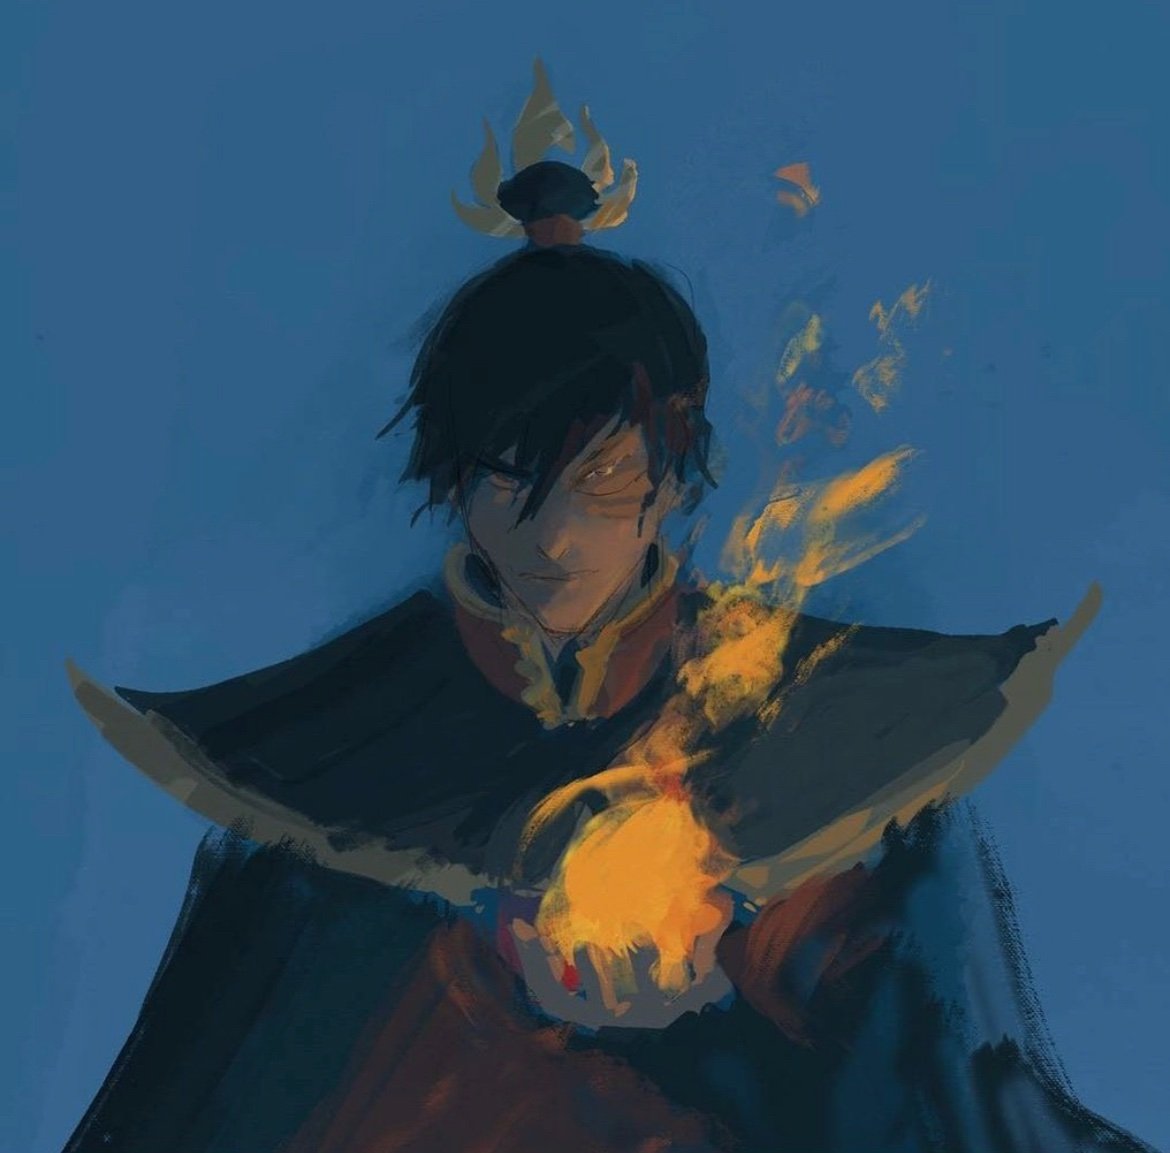 there's something about zuko in this official art...